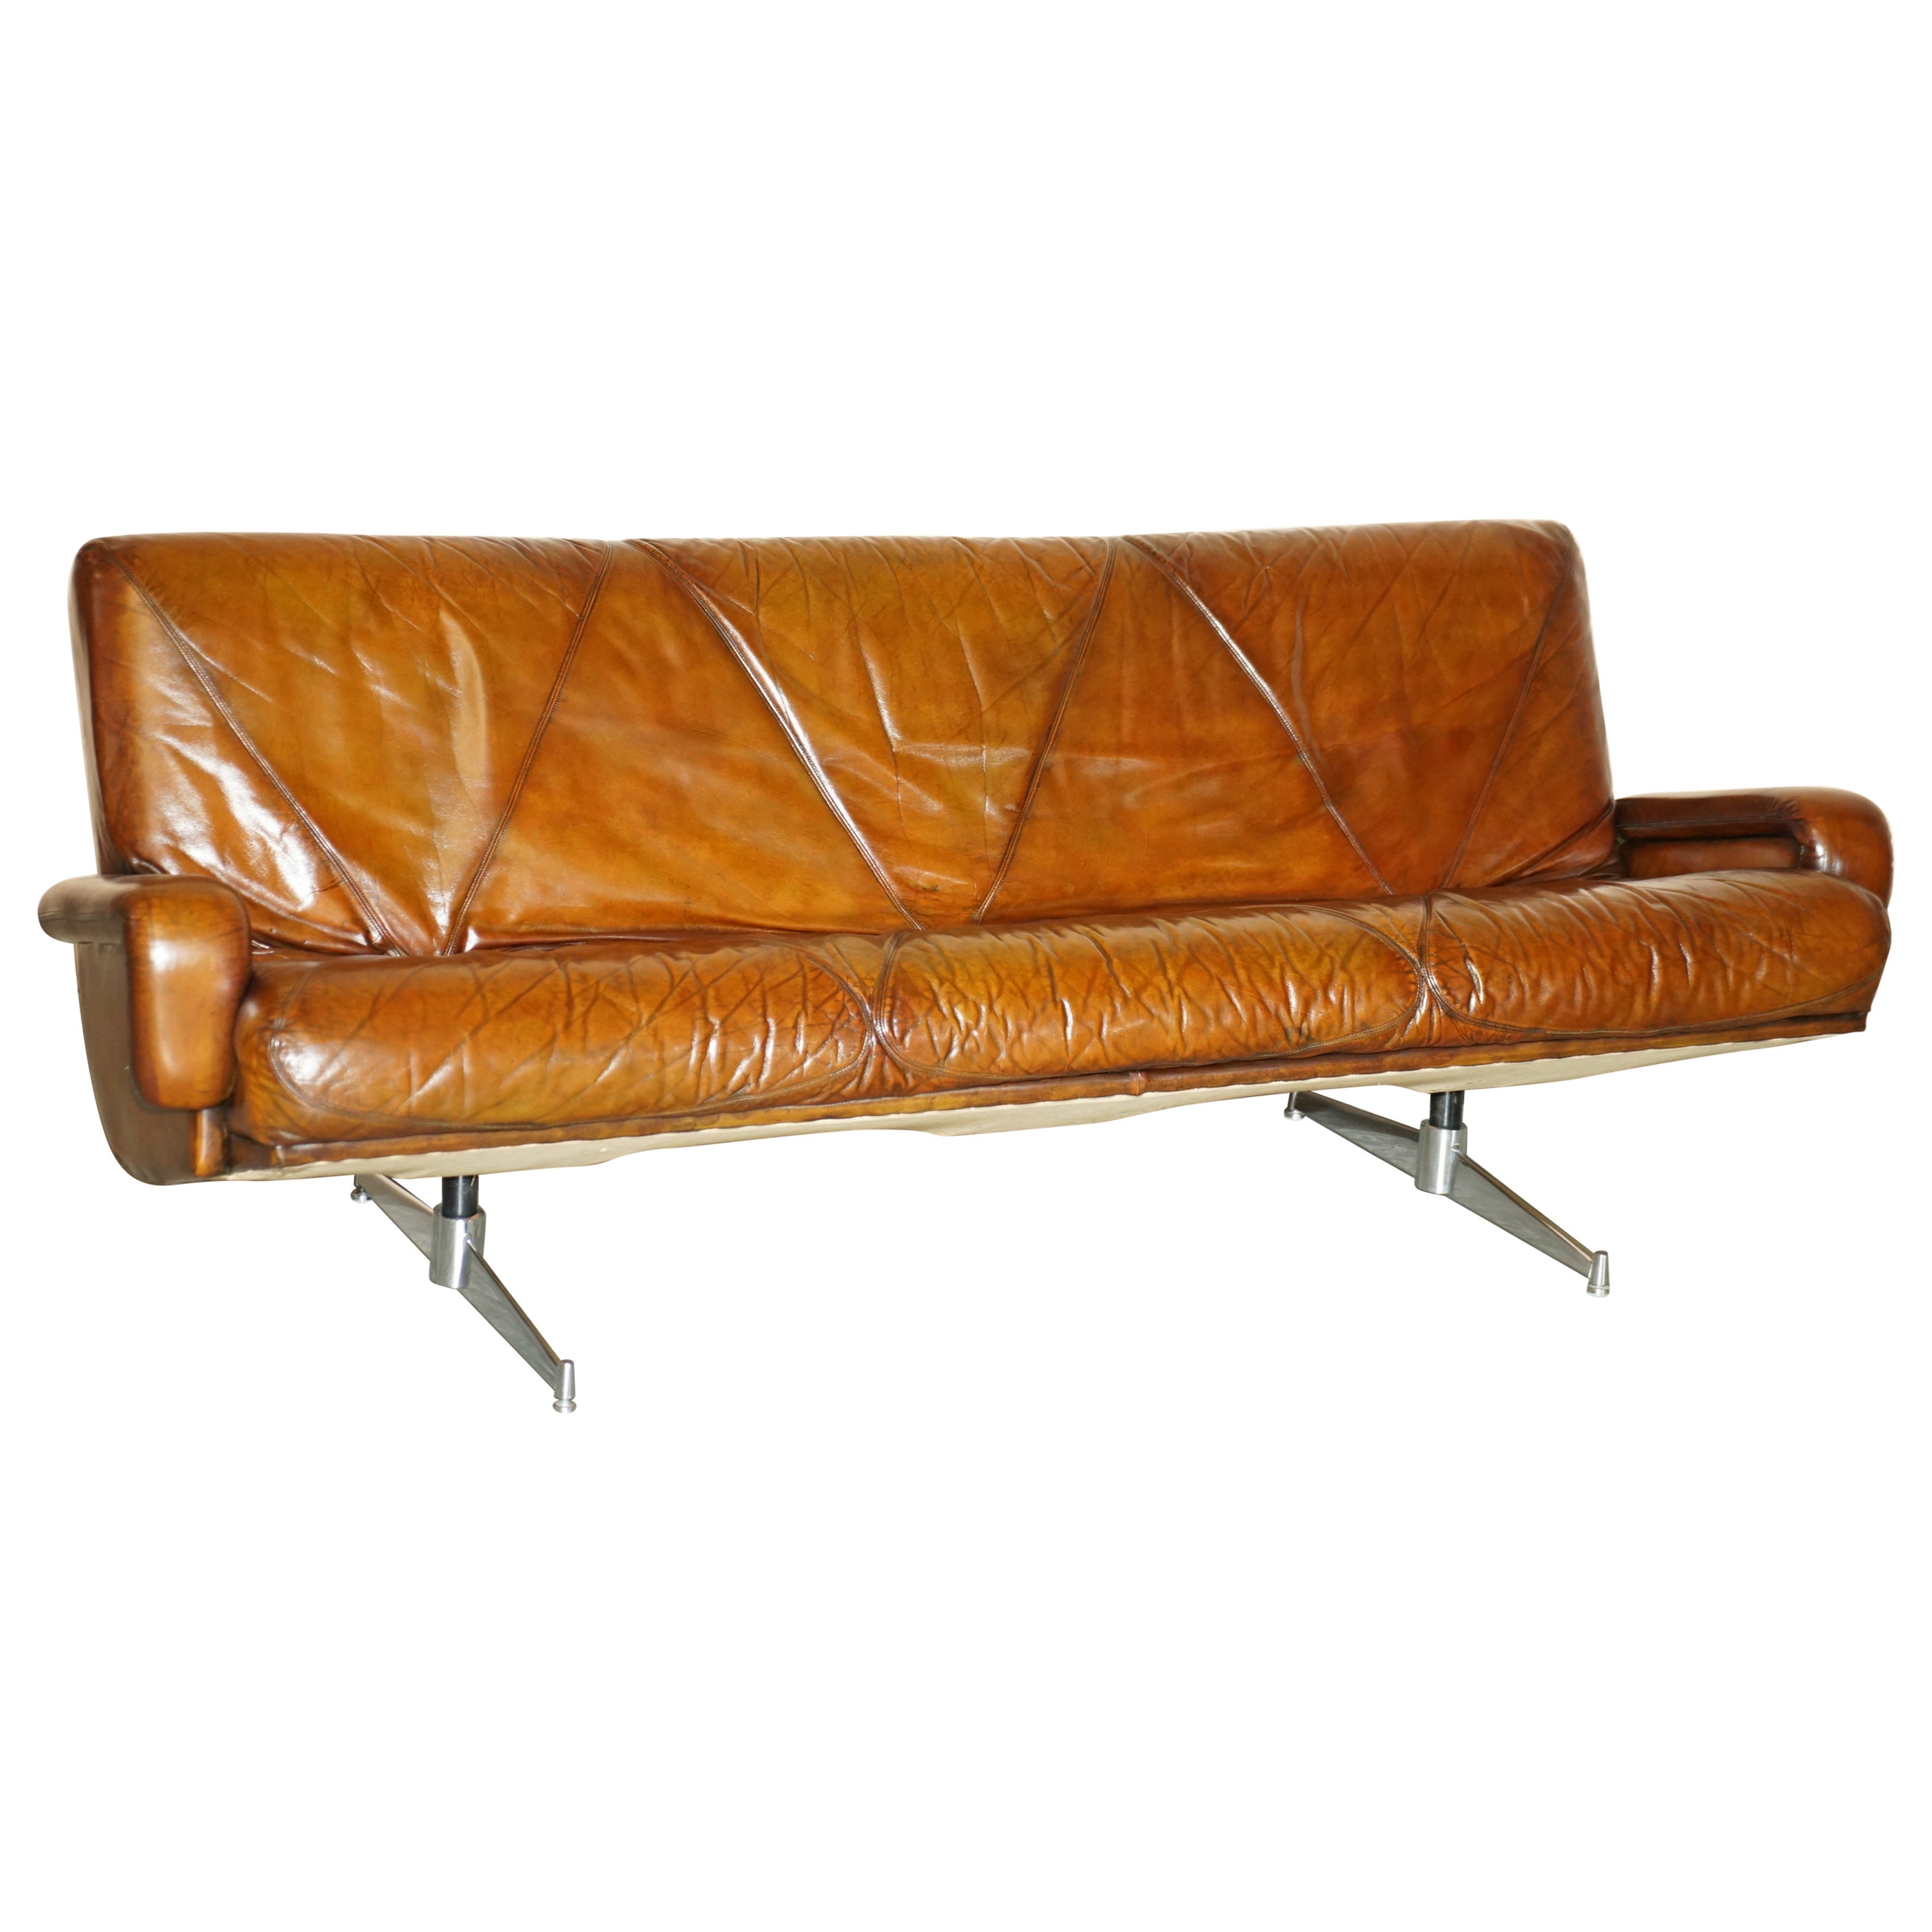 Fully Restored Vintage Mid-Century Modern Hand Dyed Brown Leather Stylish Sofa For Sale